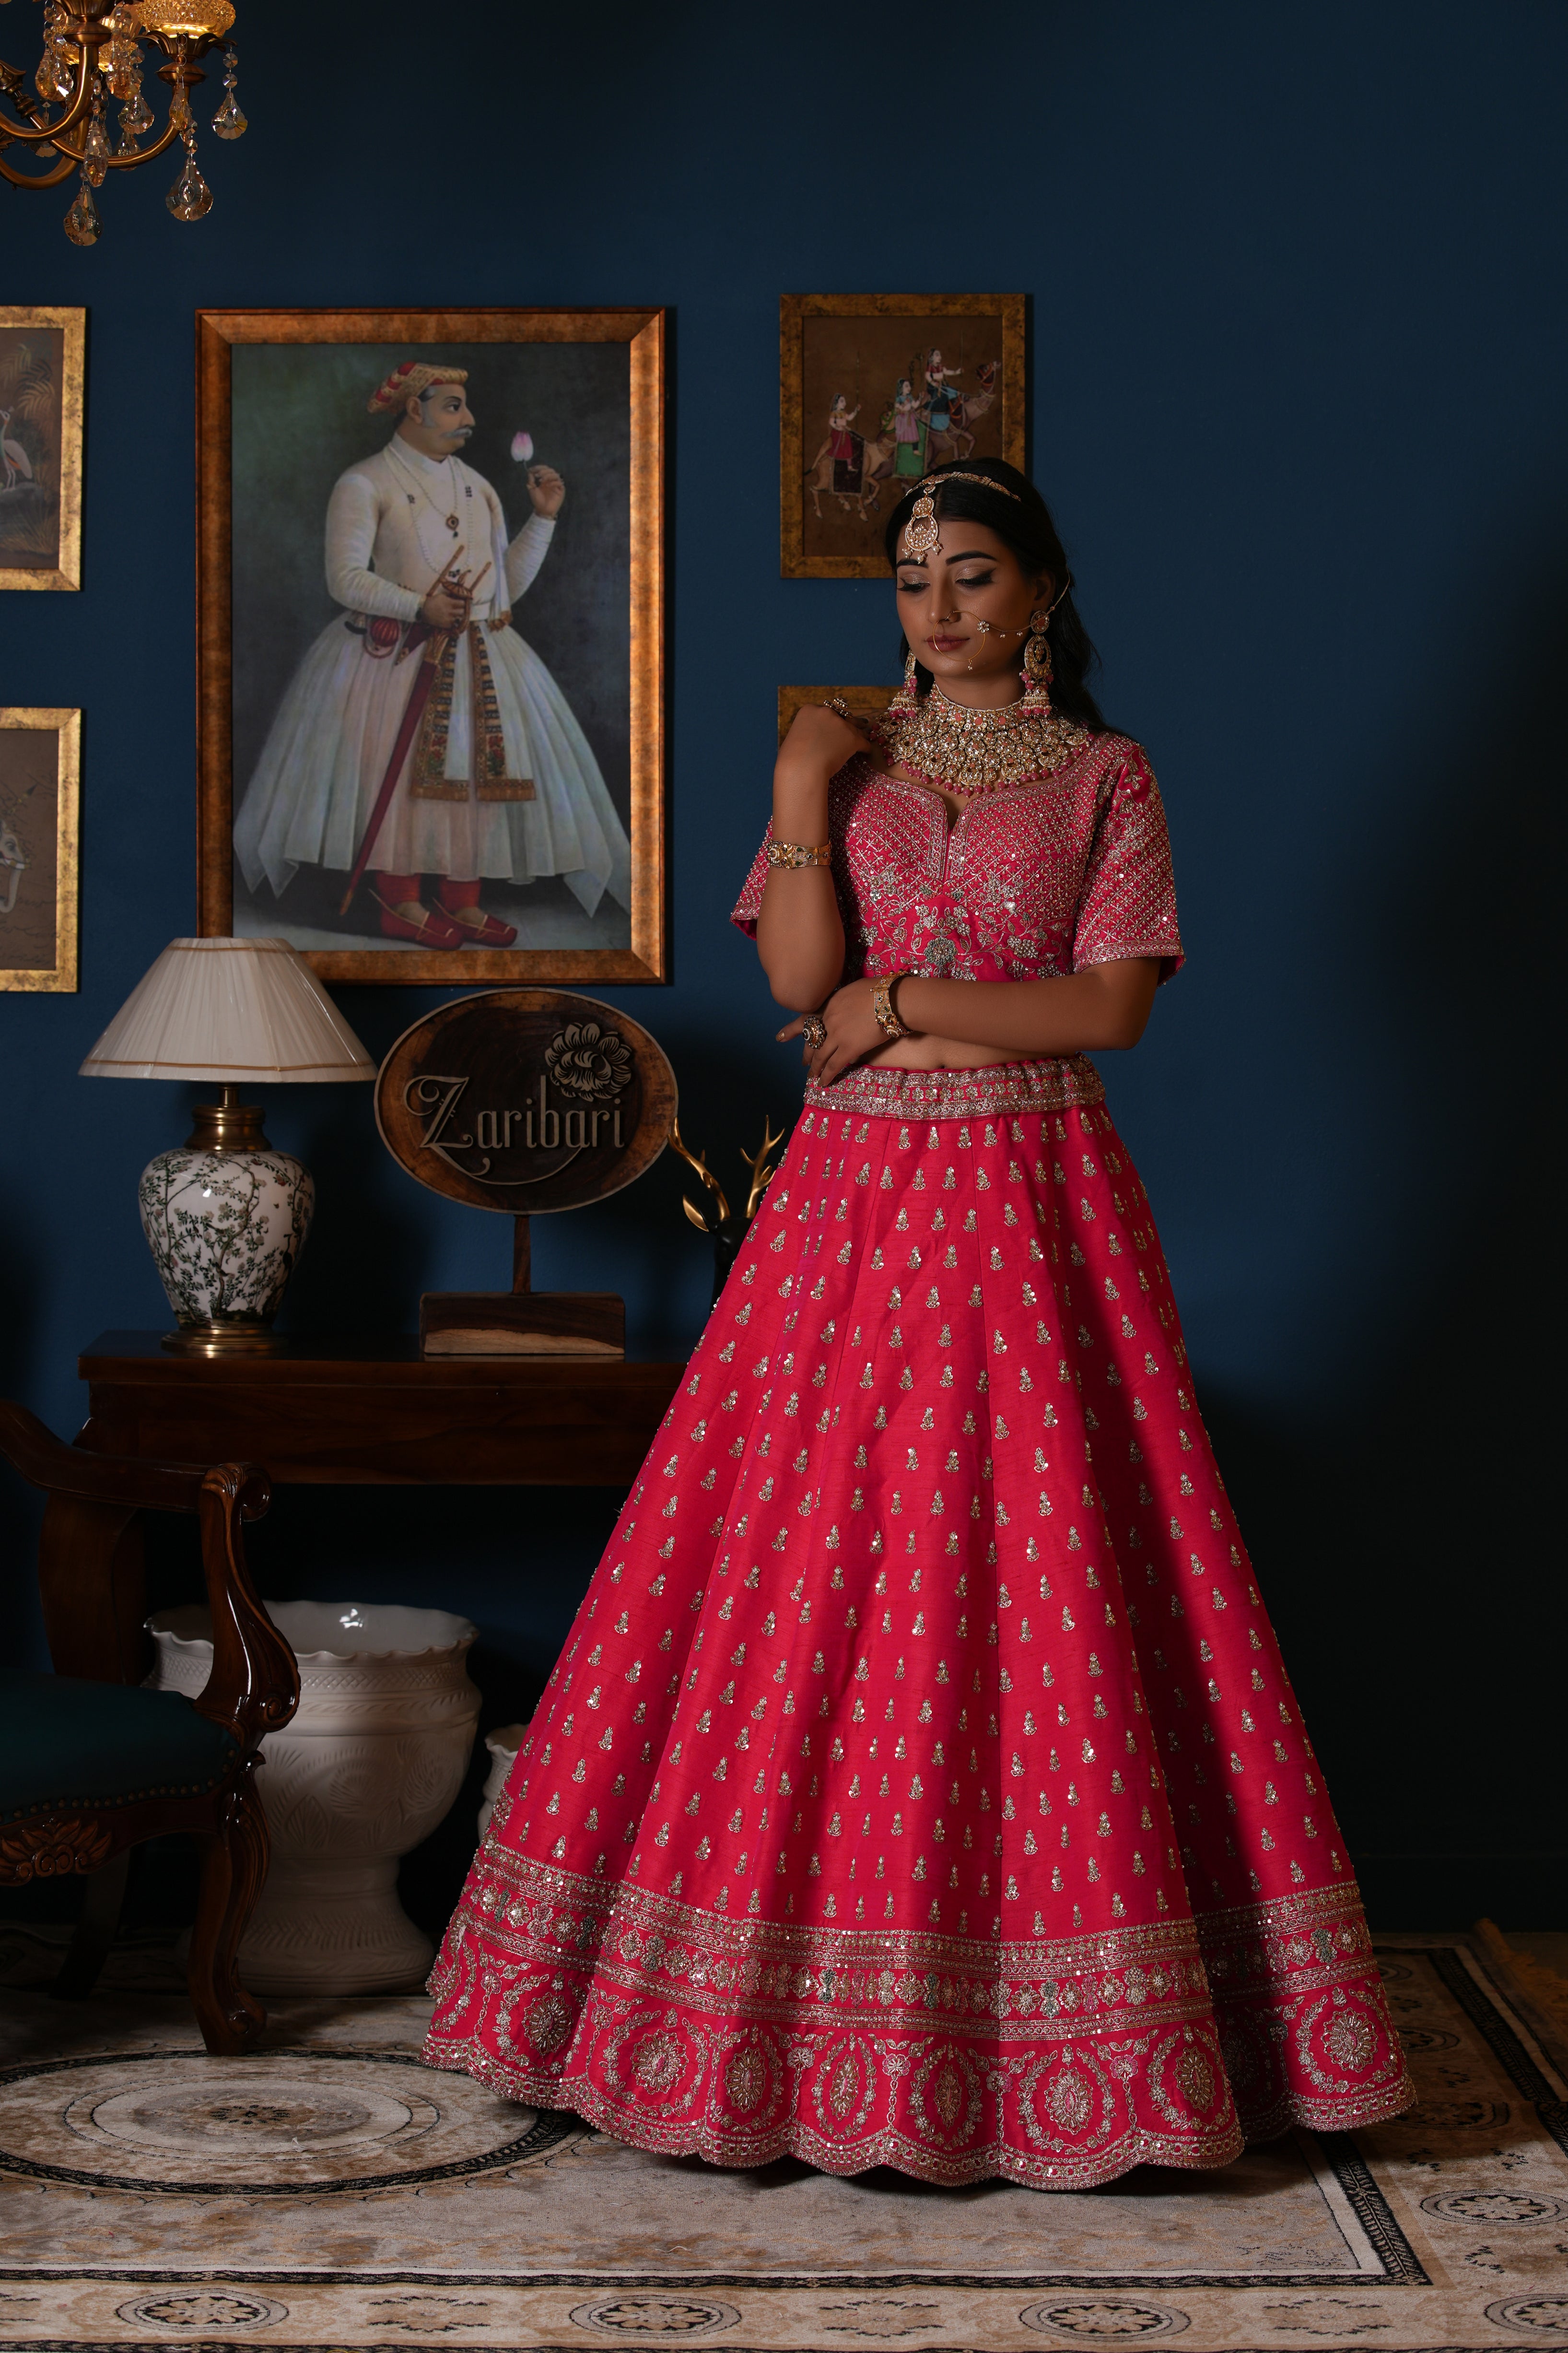 Elevate Your Persona with Zaribari's Exquisite Handcrafted Lehenga Chunari  Dress. Let Your Style Speak Volumes. Visit Us and Witness... | Instagram